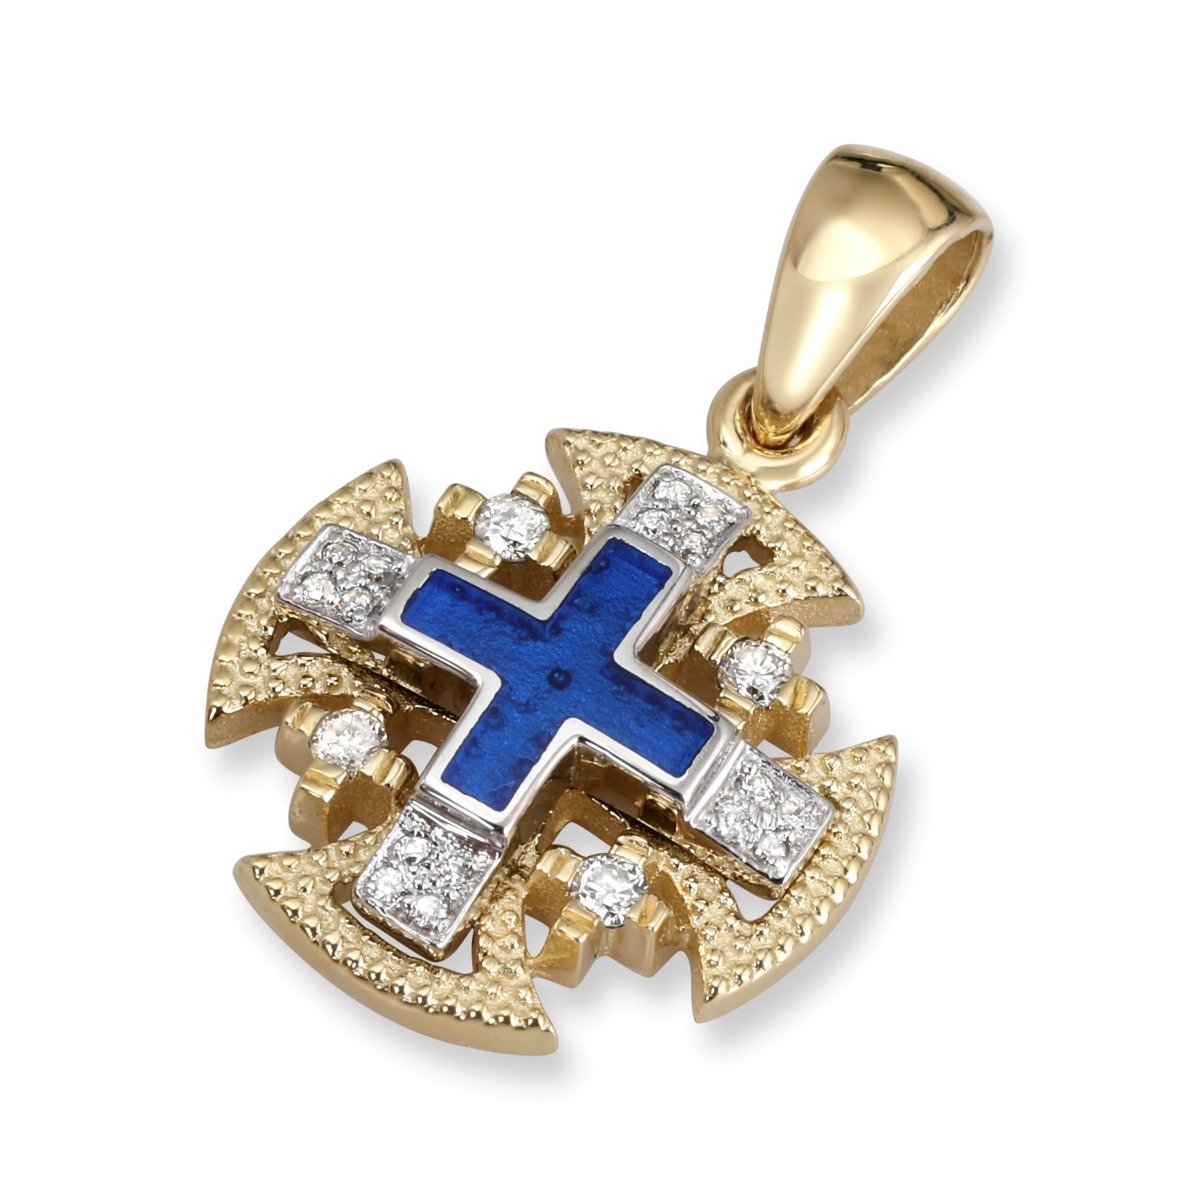 Anbinder Jewelry 14K Yellow & White Gold Two Tone Tiered Diamond and Blue Enameled Rounded Milgrain Jerusalem Cross Pendant with 20 Diamonds - 1